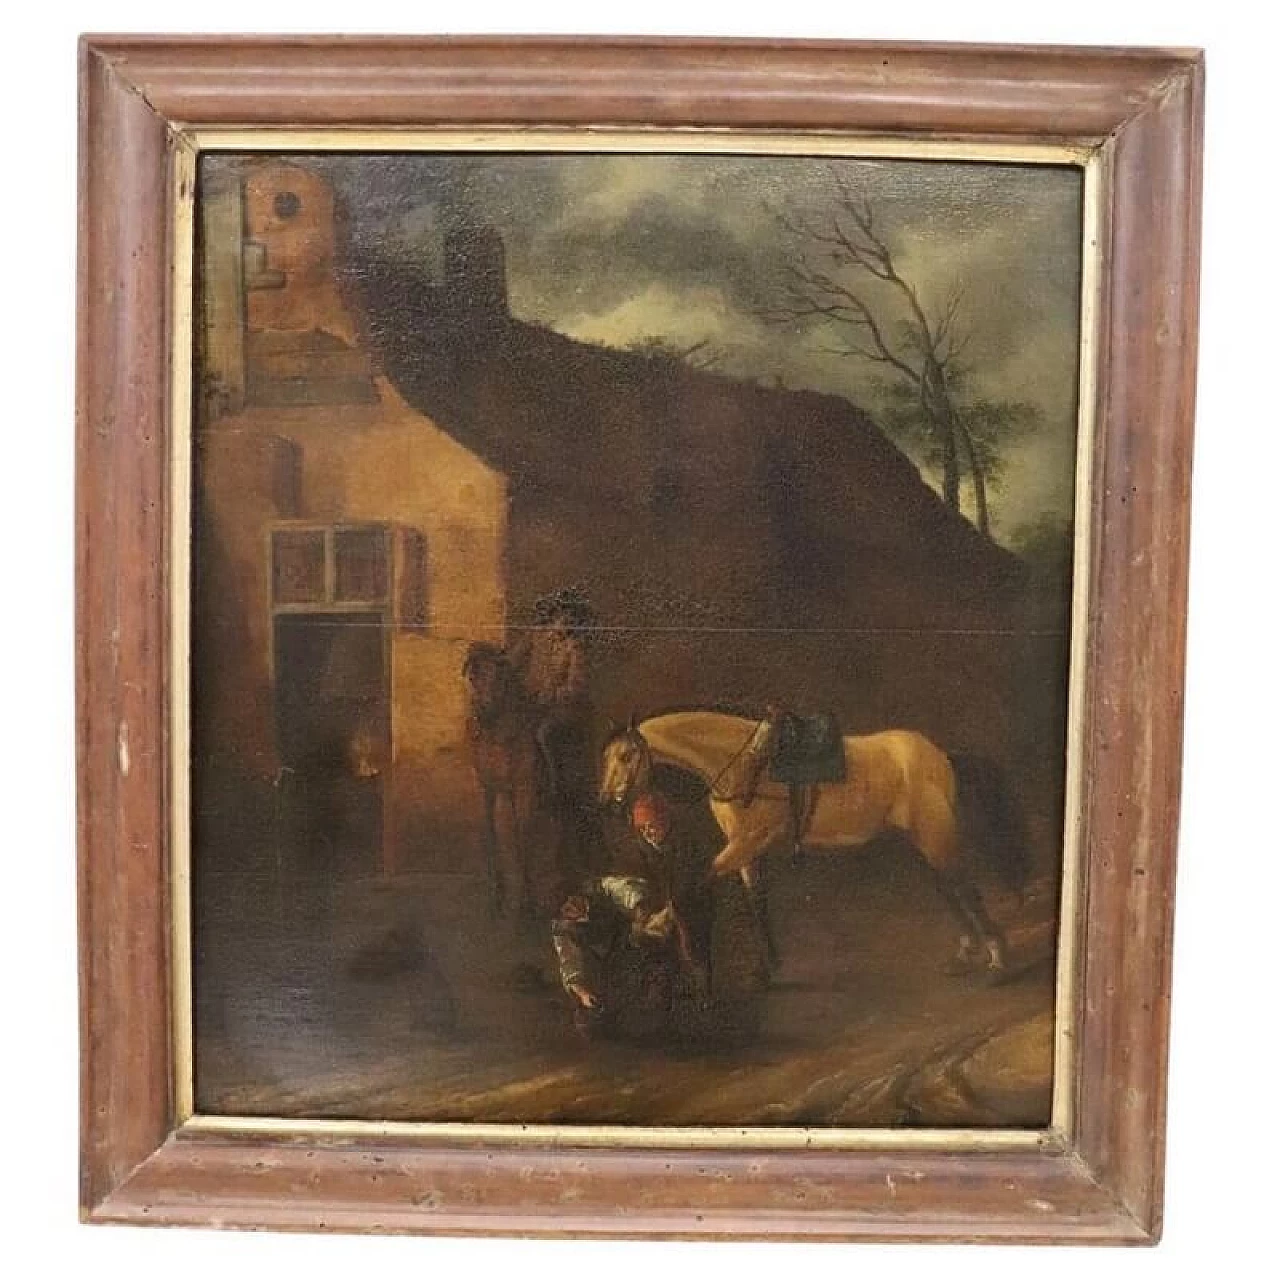 Farrier at work, oil painting on canvas, first half of the 17th century 1